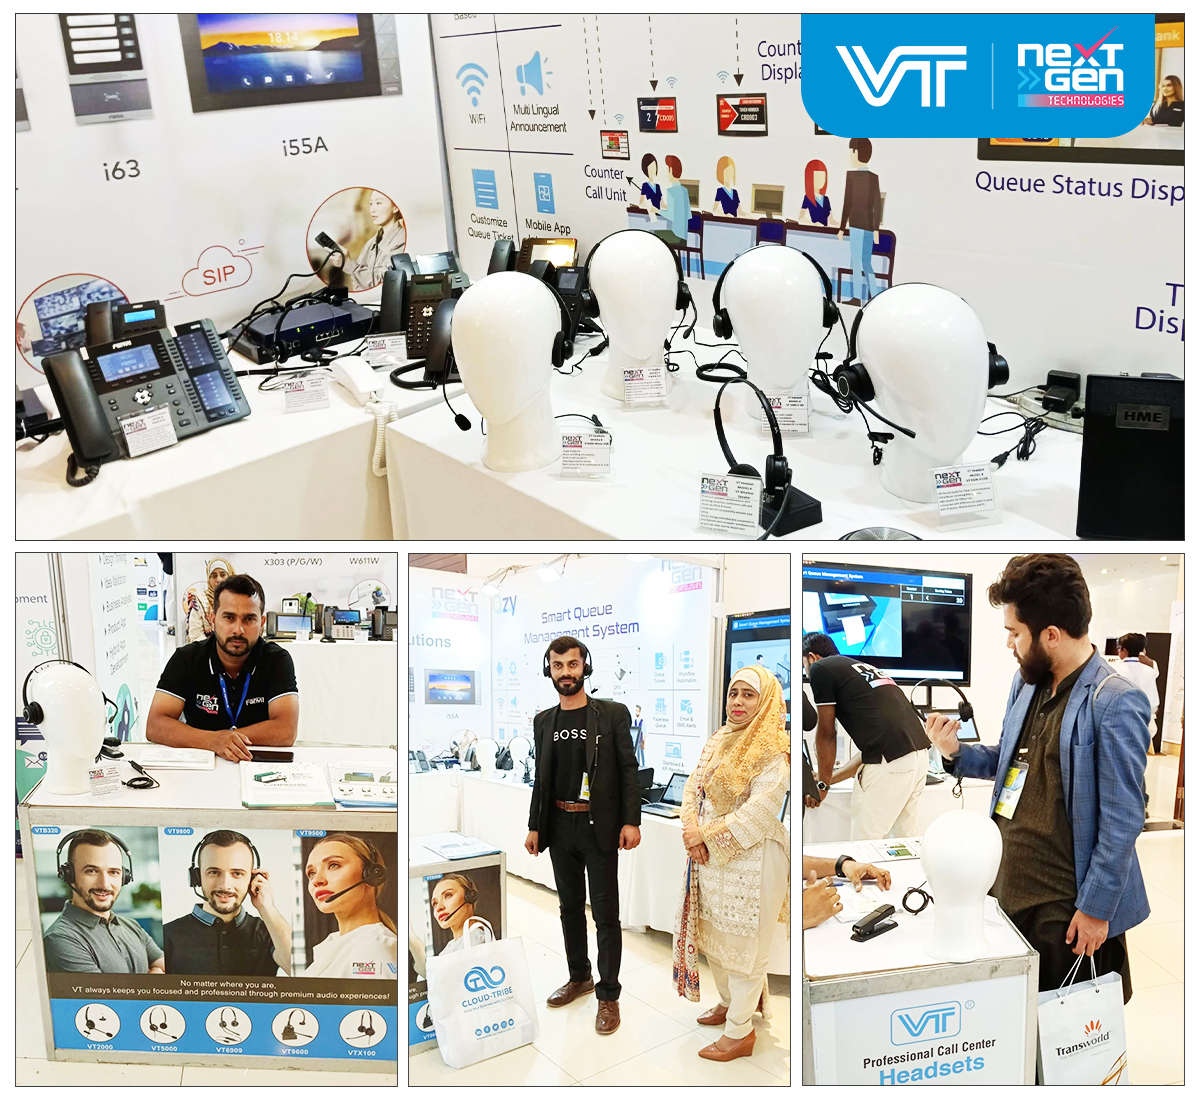 VT Pakistan Distributor participated in ITCN Asia Exhibition  with VT Headsets on 23-25 Feb 2023